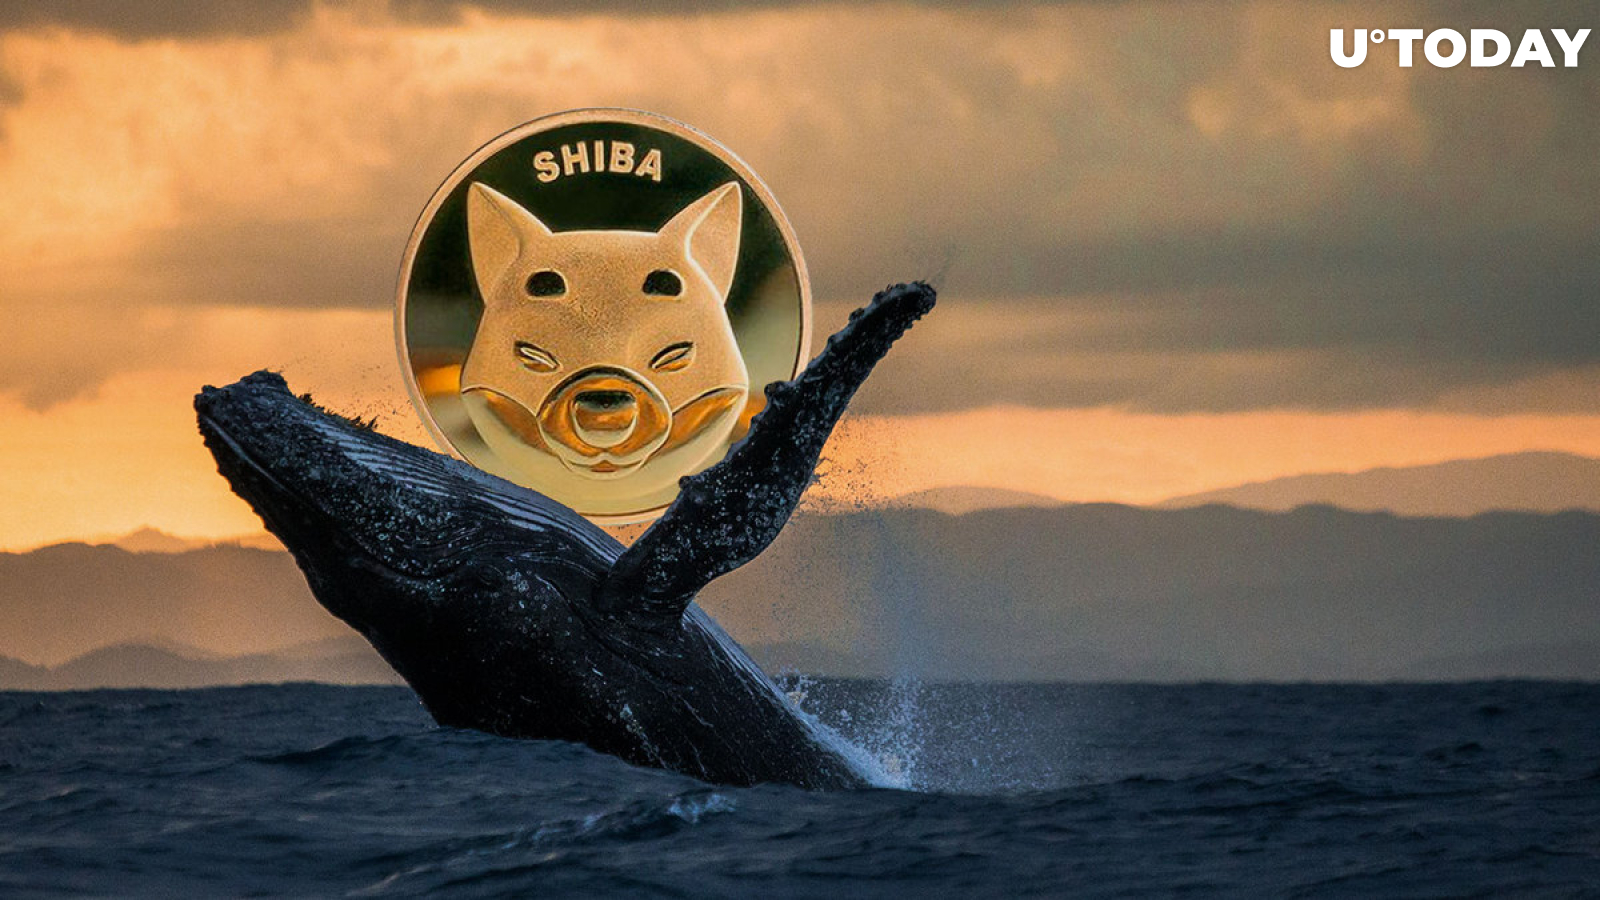 SHIB Beats MATIC, LINK, MANA as Number 1 Asset for Whales: Report